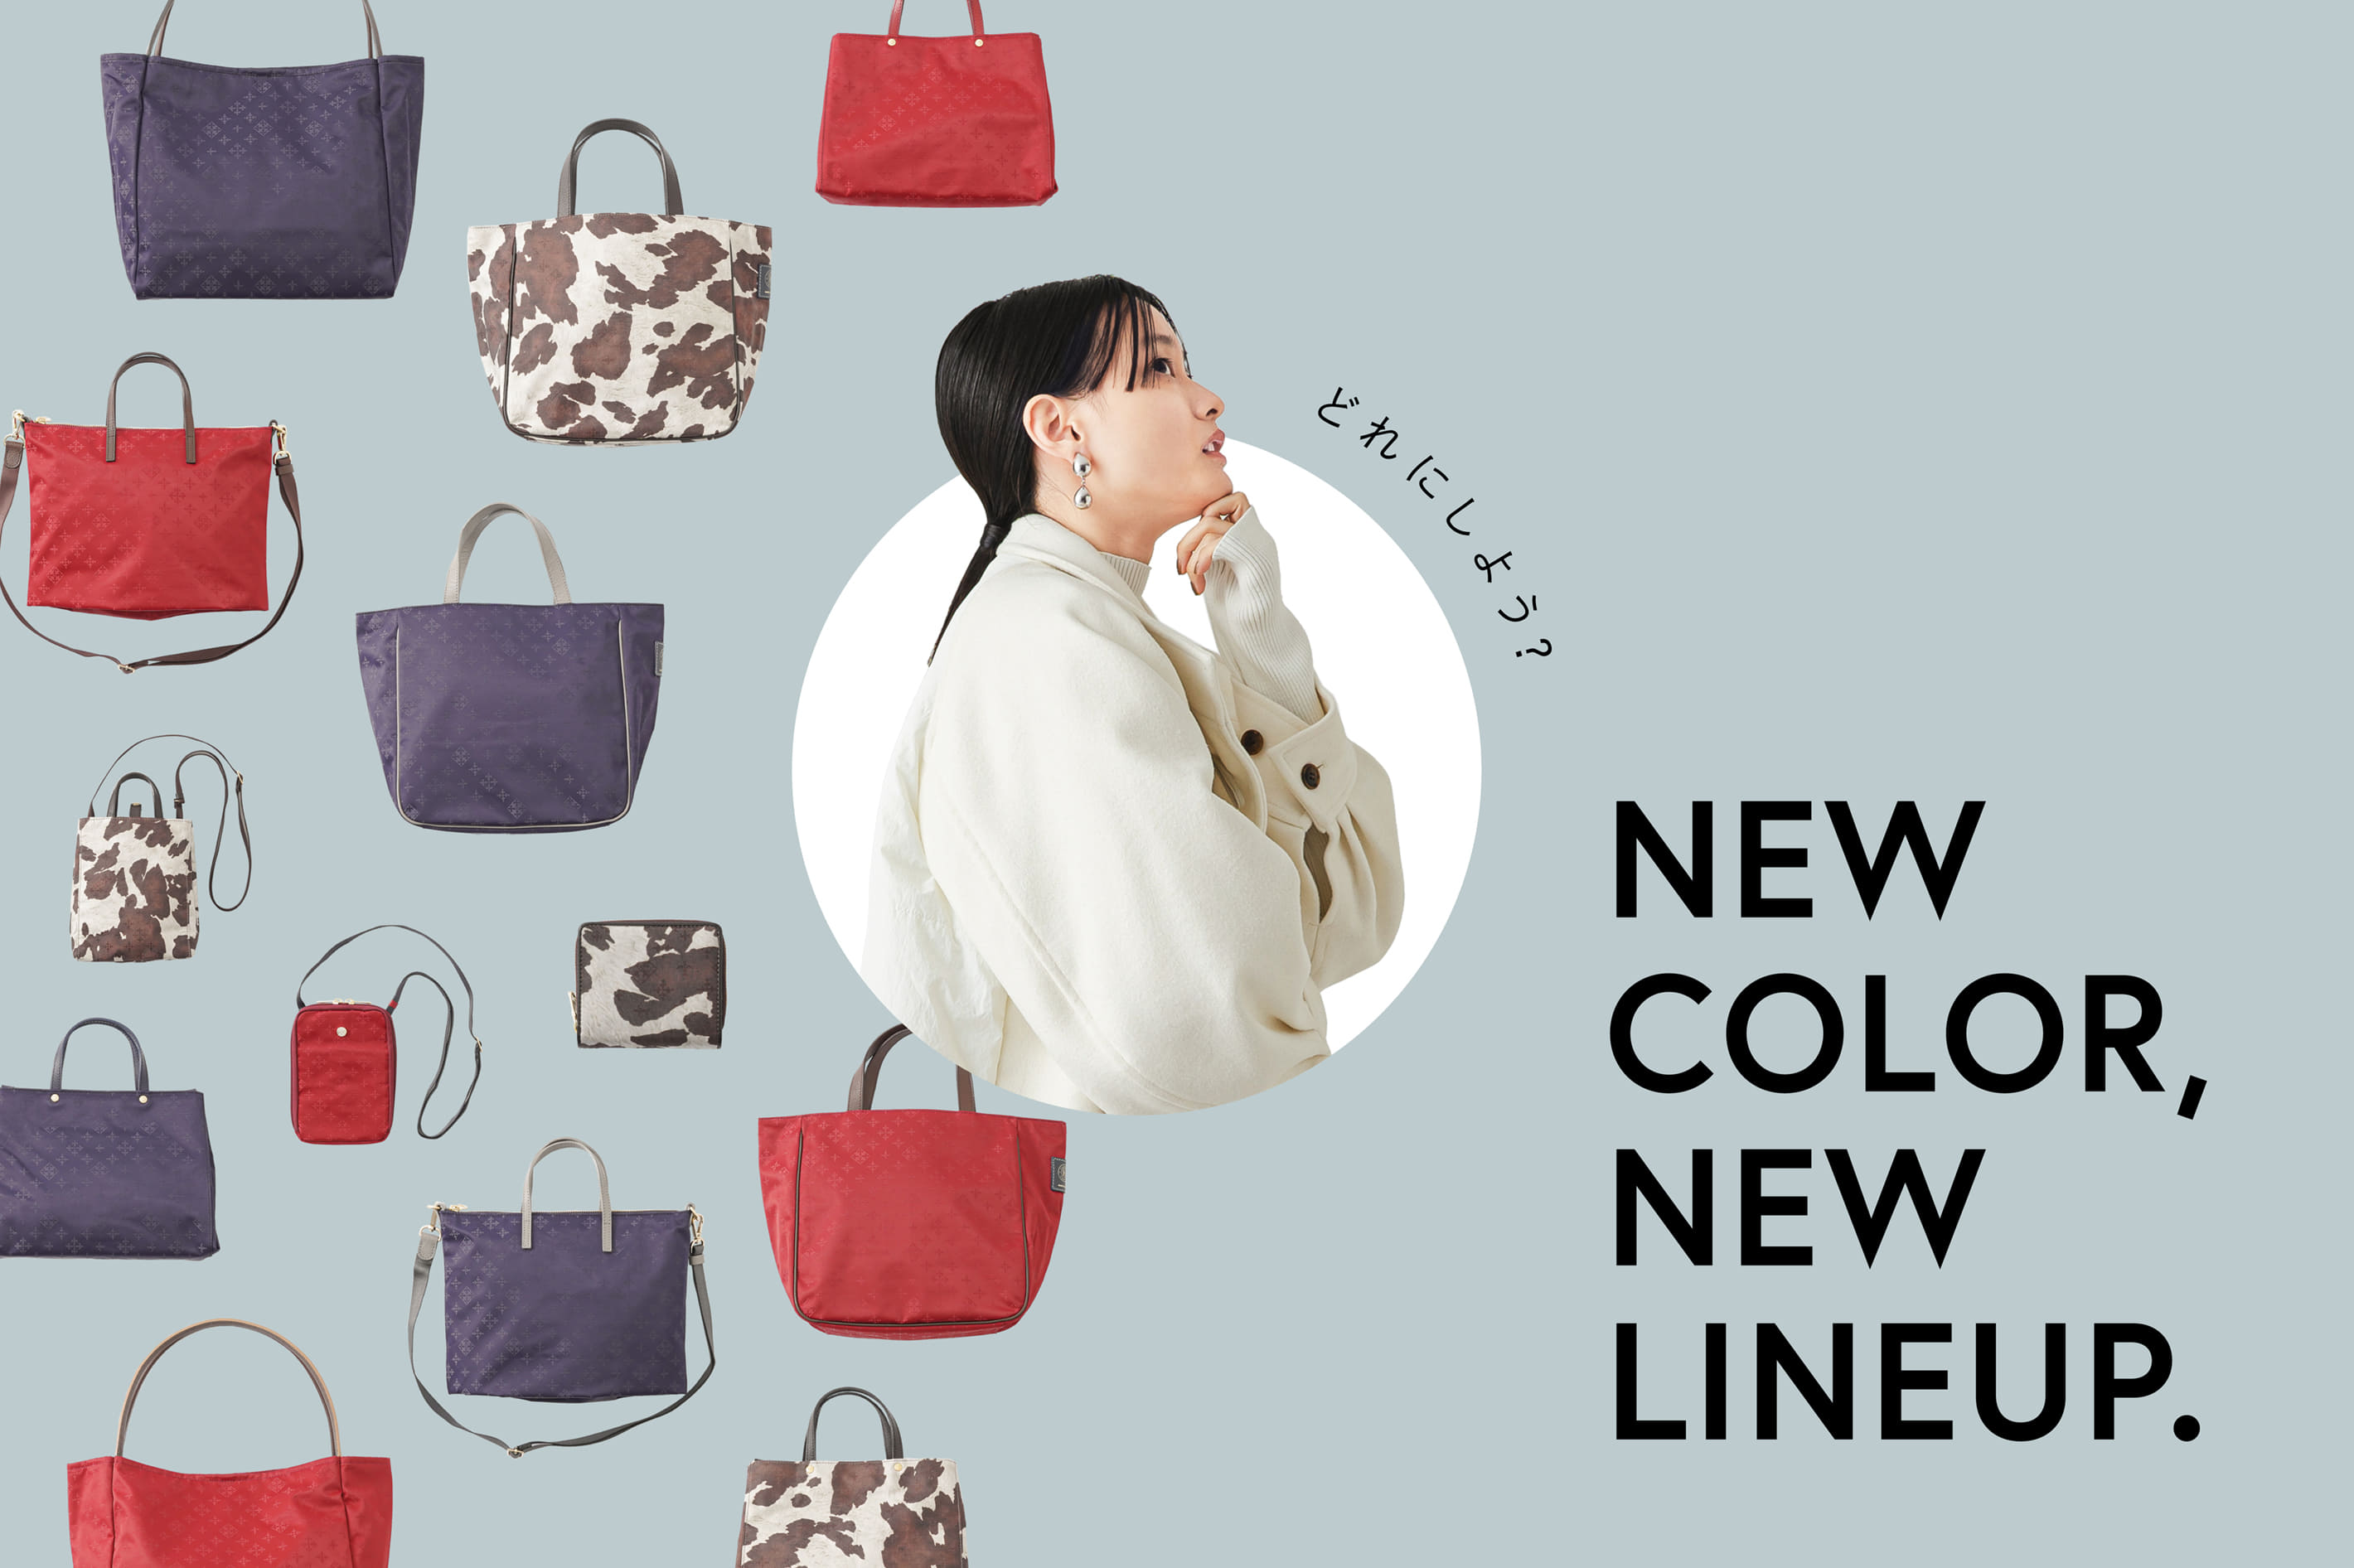 russet NEW COLOR ,NEW LINE UP ー新色、あなたはどれを選ぶ？ー